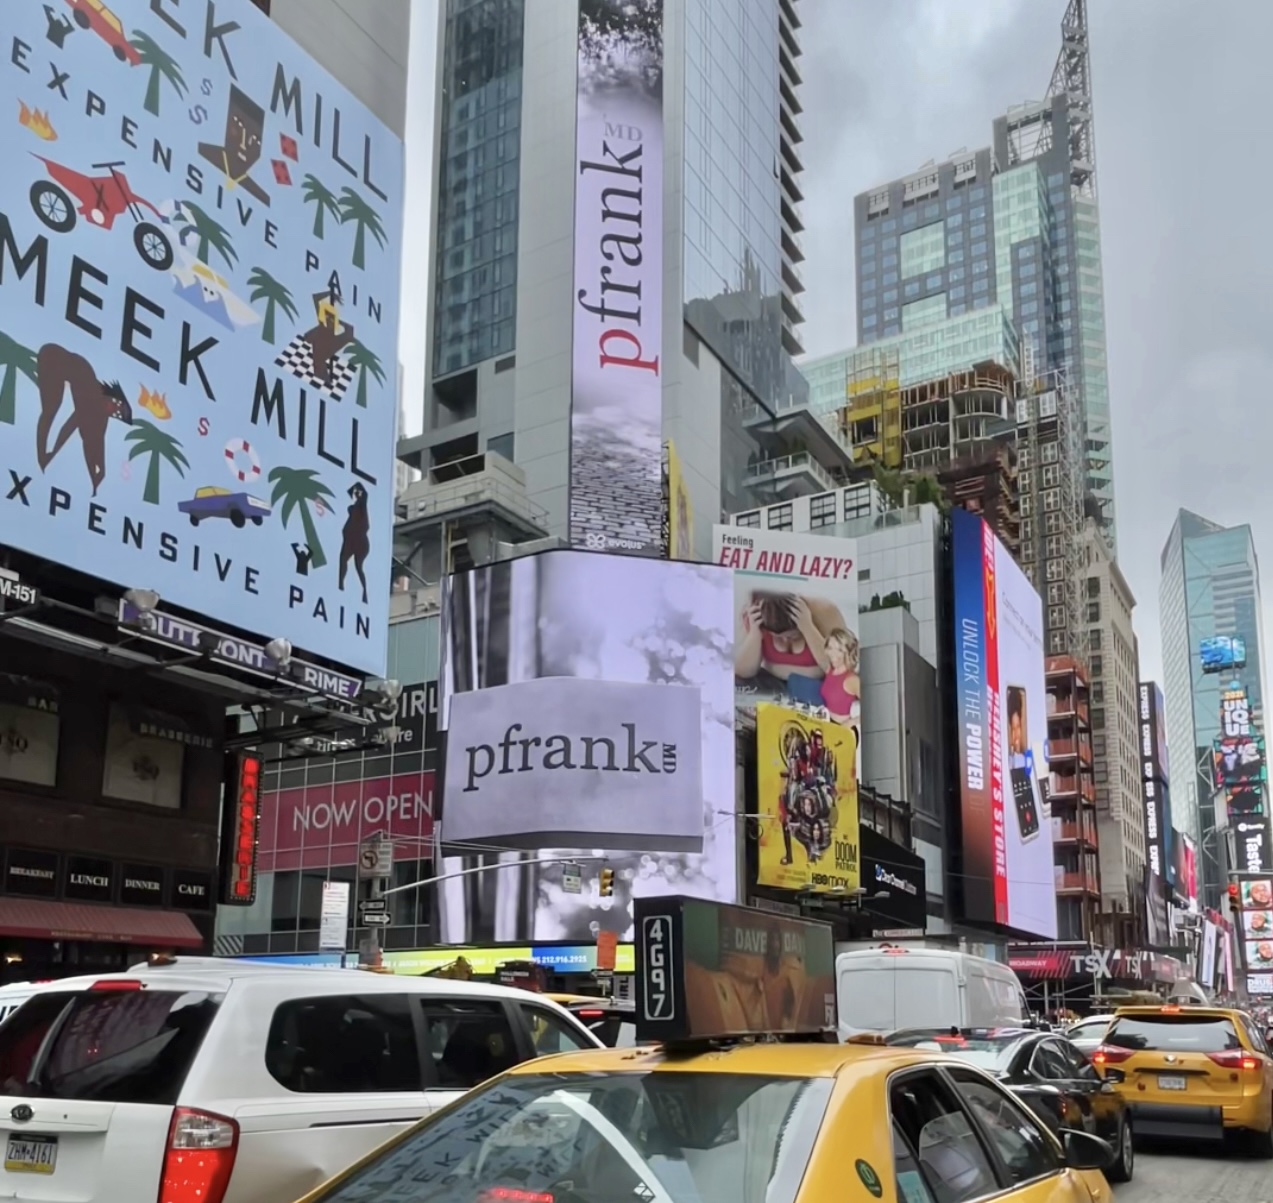 PFRANKMD Billboards in Times Square, NY